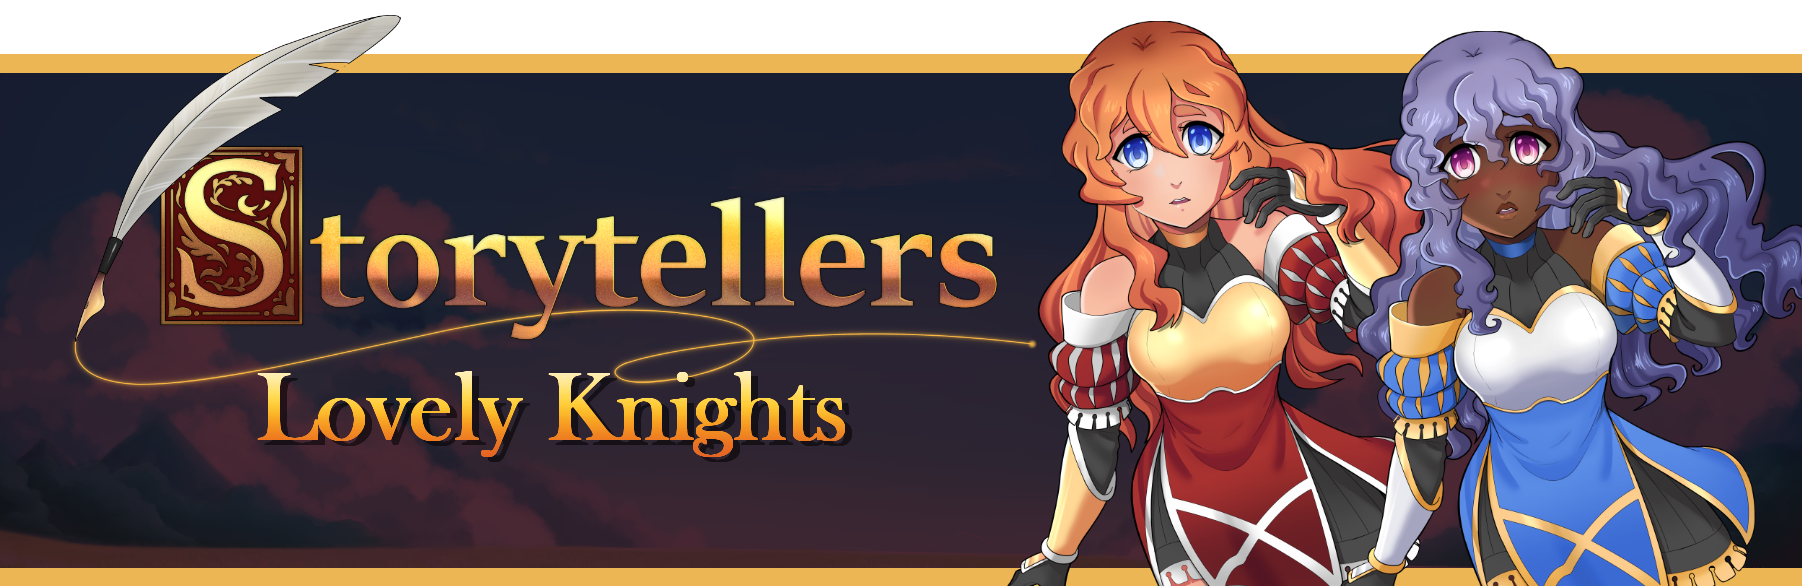 Storytellers Character Assets (Lovely Knights)